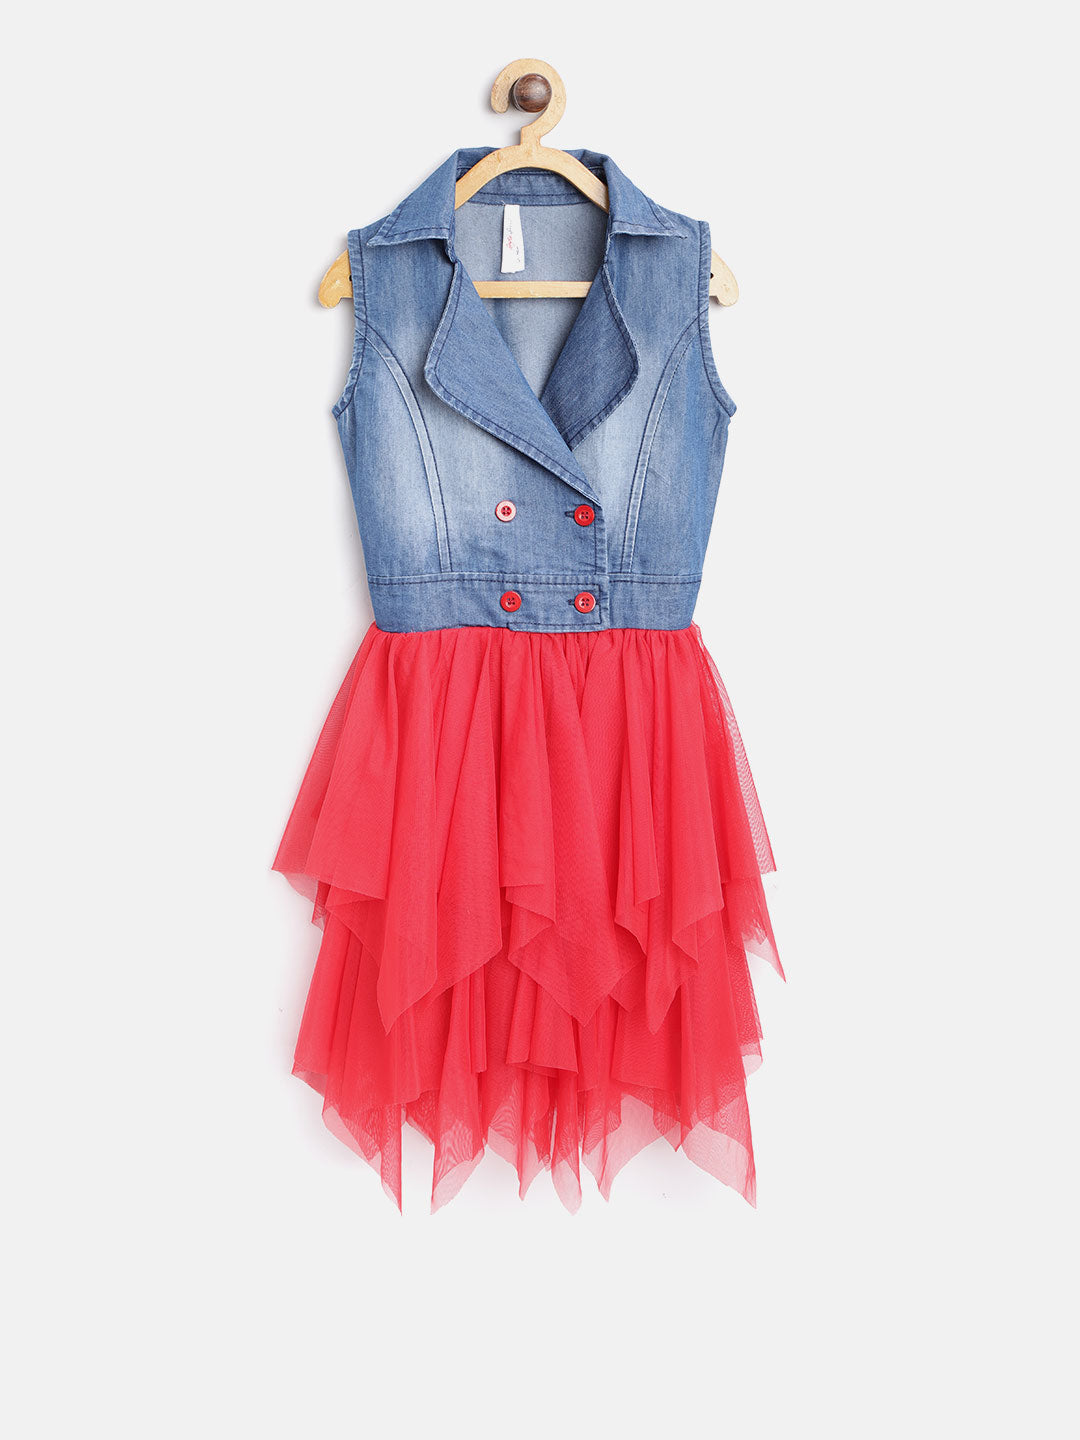 Gilr's Denim And Blue And Red Floral Printed Dress - StyleStone Kid